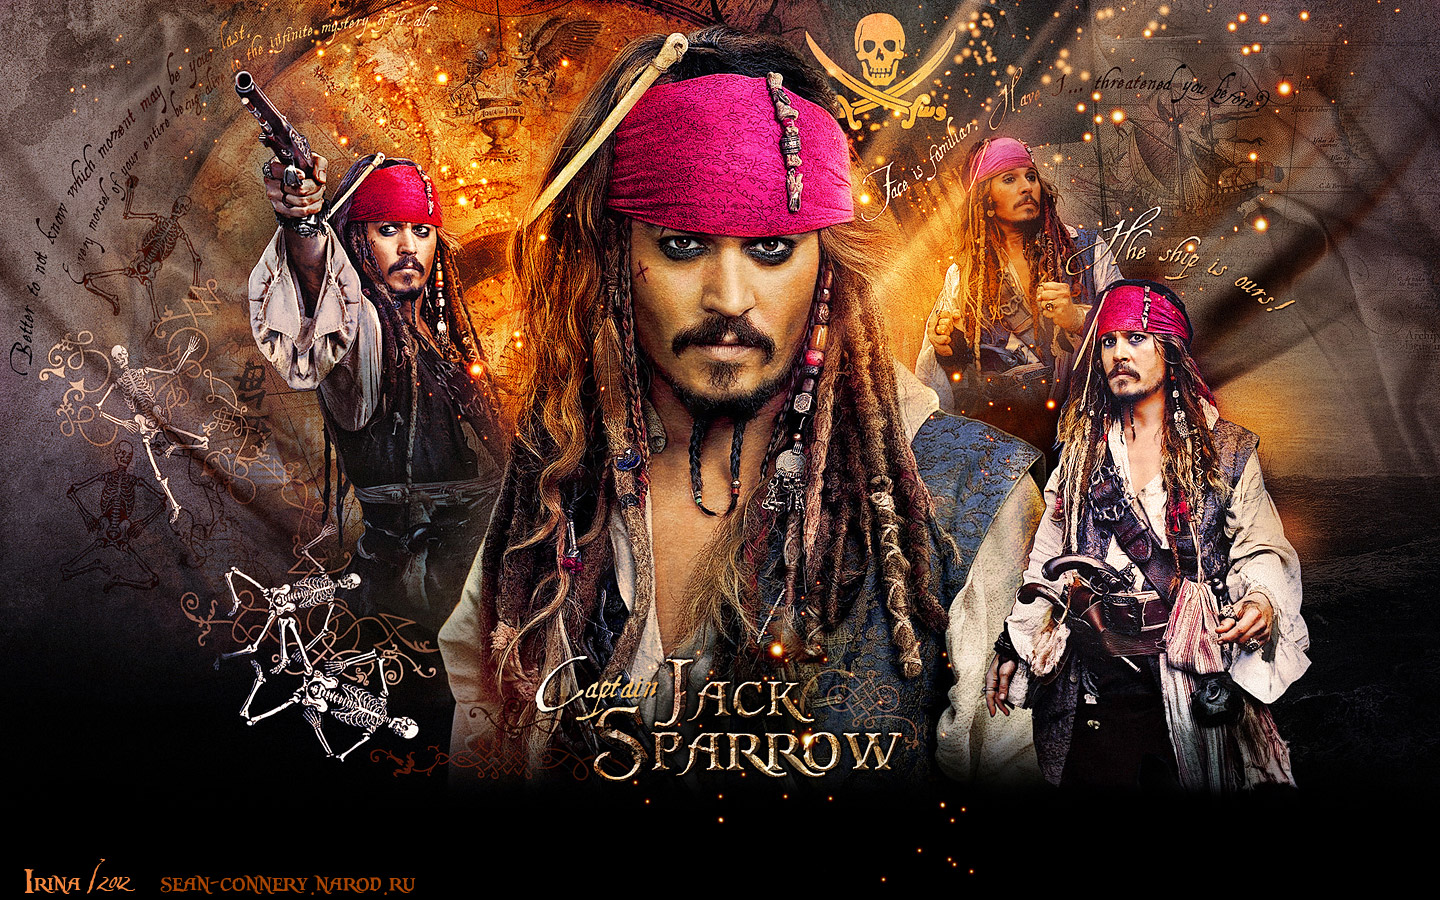 Pirates of the caribbean wallpaper, free easter wallpaper ...